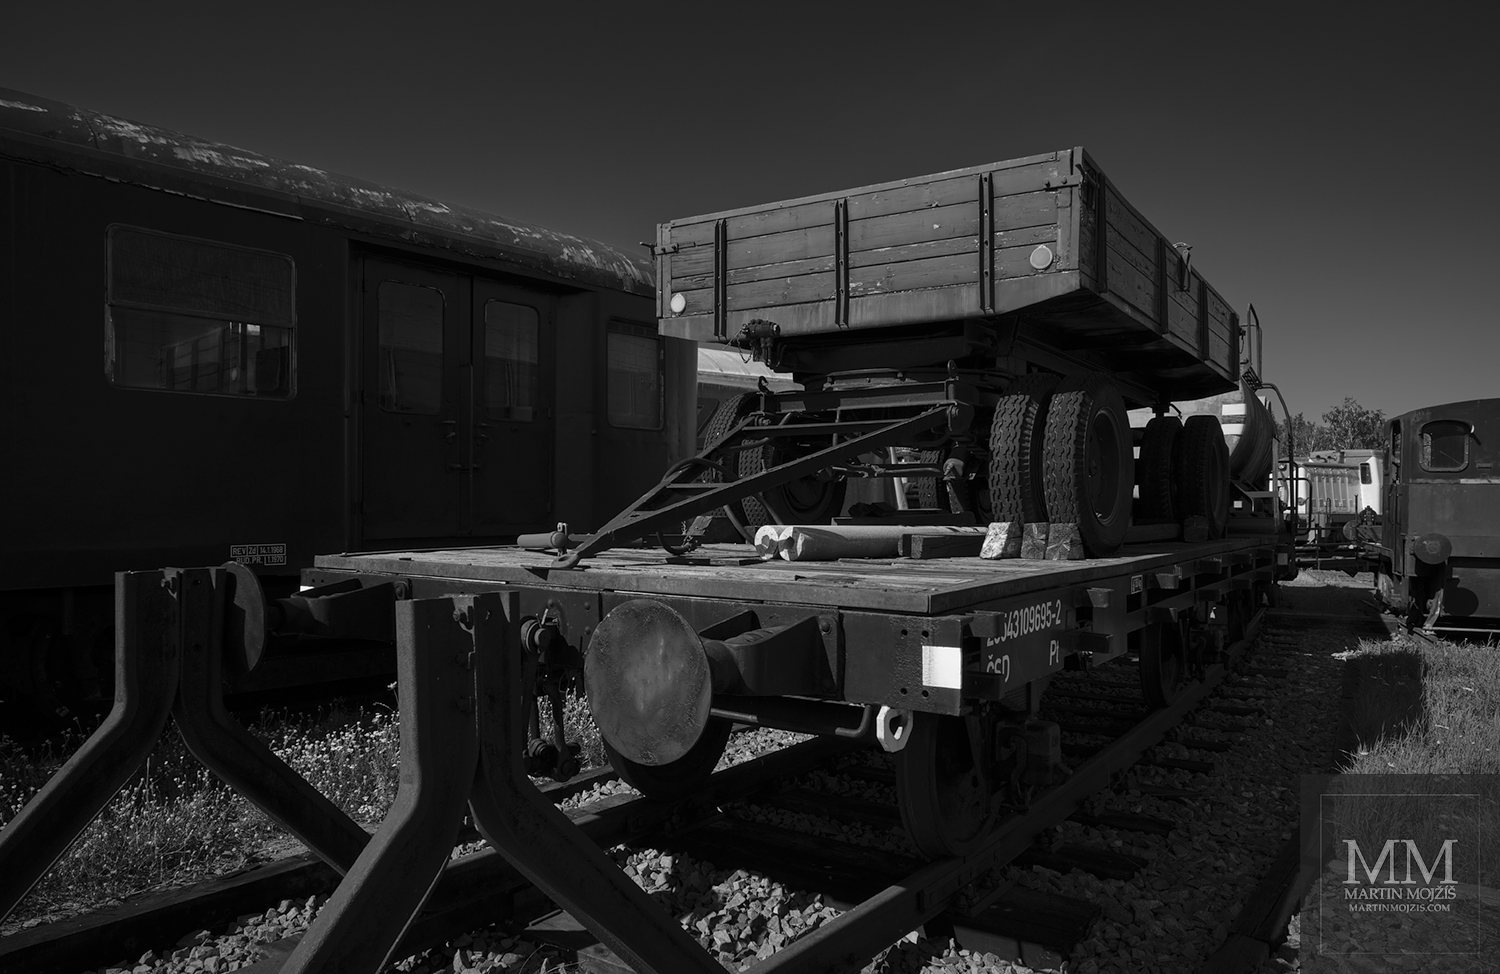 A road flatbed loaded on a railway platform wagon. Black and white fine art photograph REST IN THE MIDDLE OF SUMMER I, photographed by Martin Mojzis.